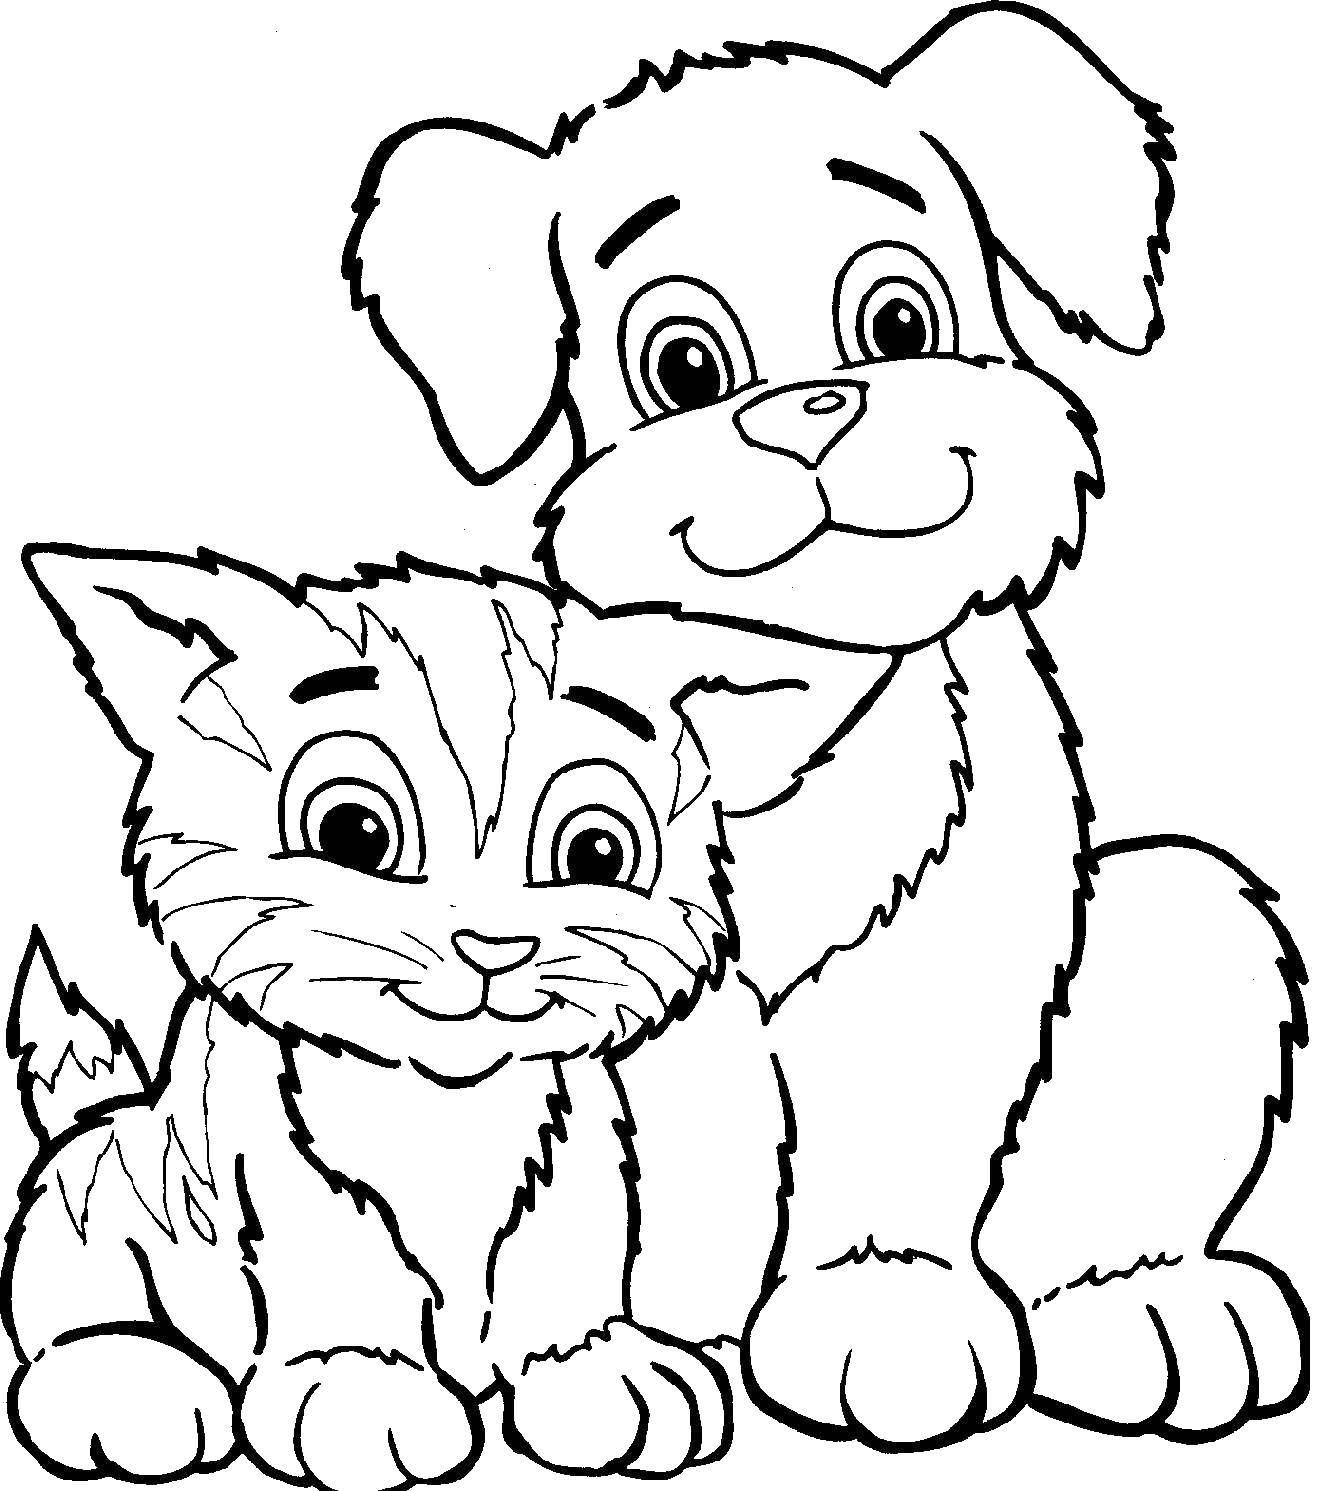 Coloring Dog and cat. Category Animals. Tags:  dog, cat, animals.